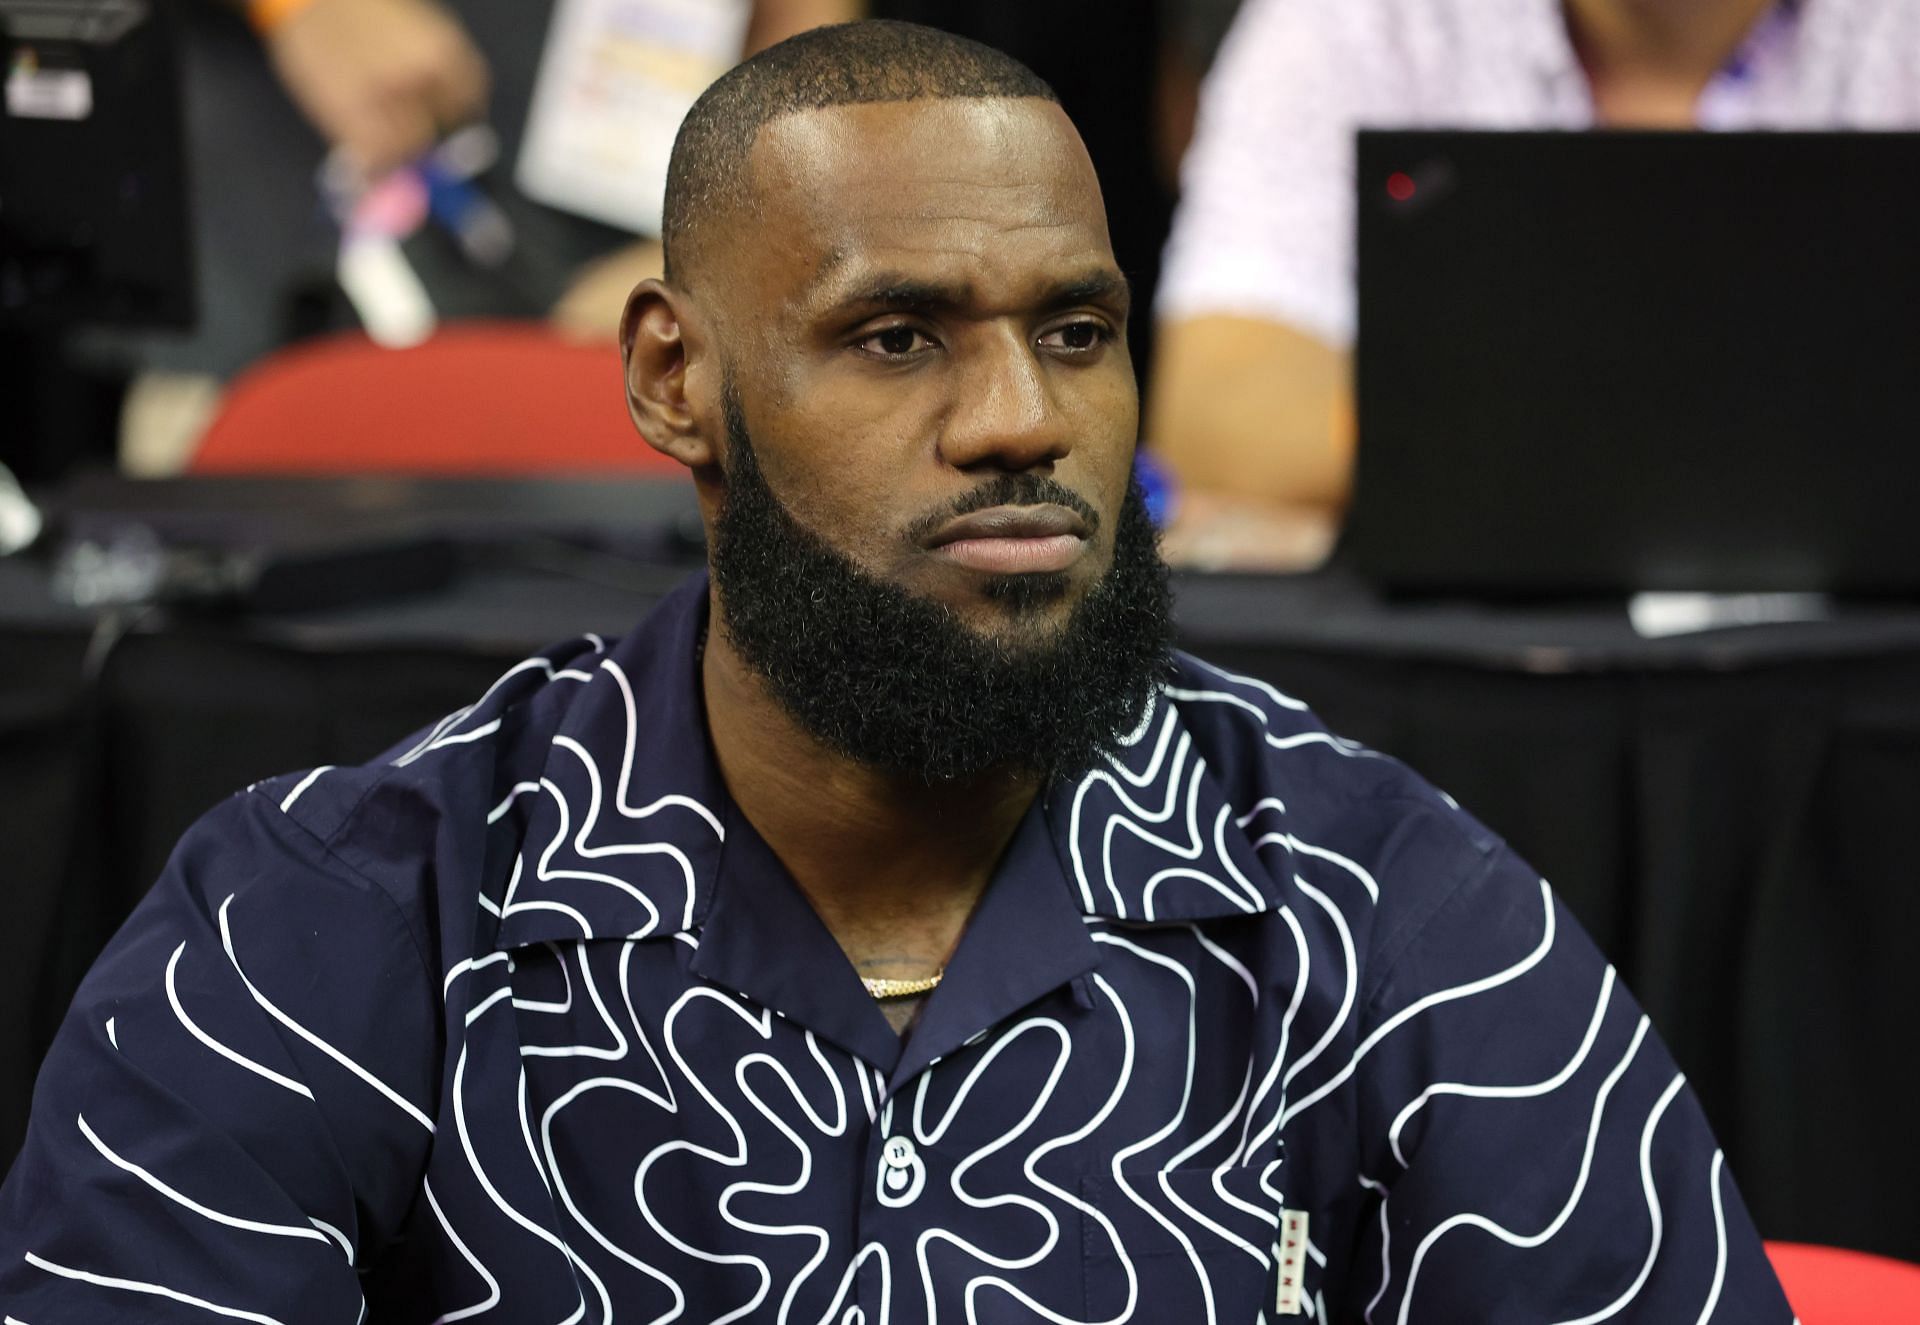 LeBron's greatness questioned: There used to be threepeats, now we